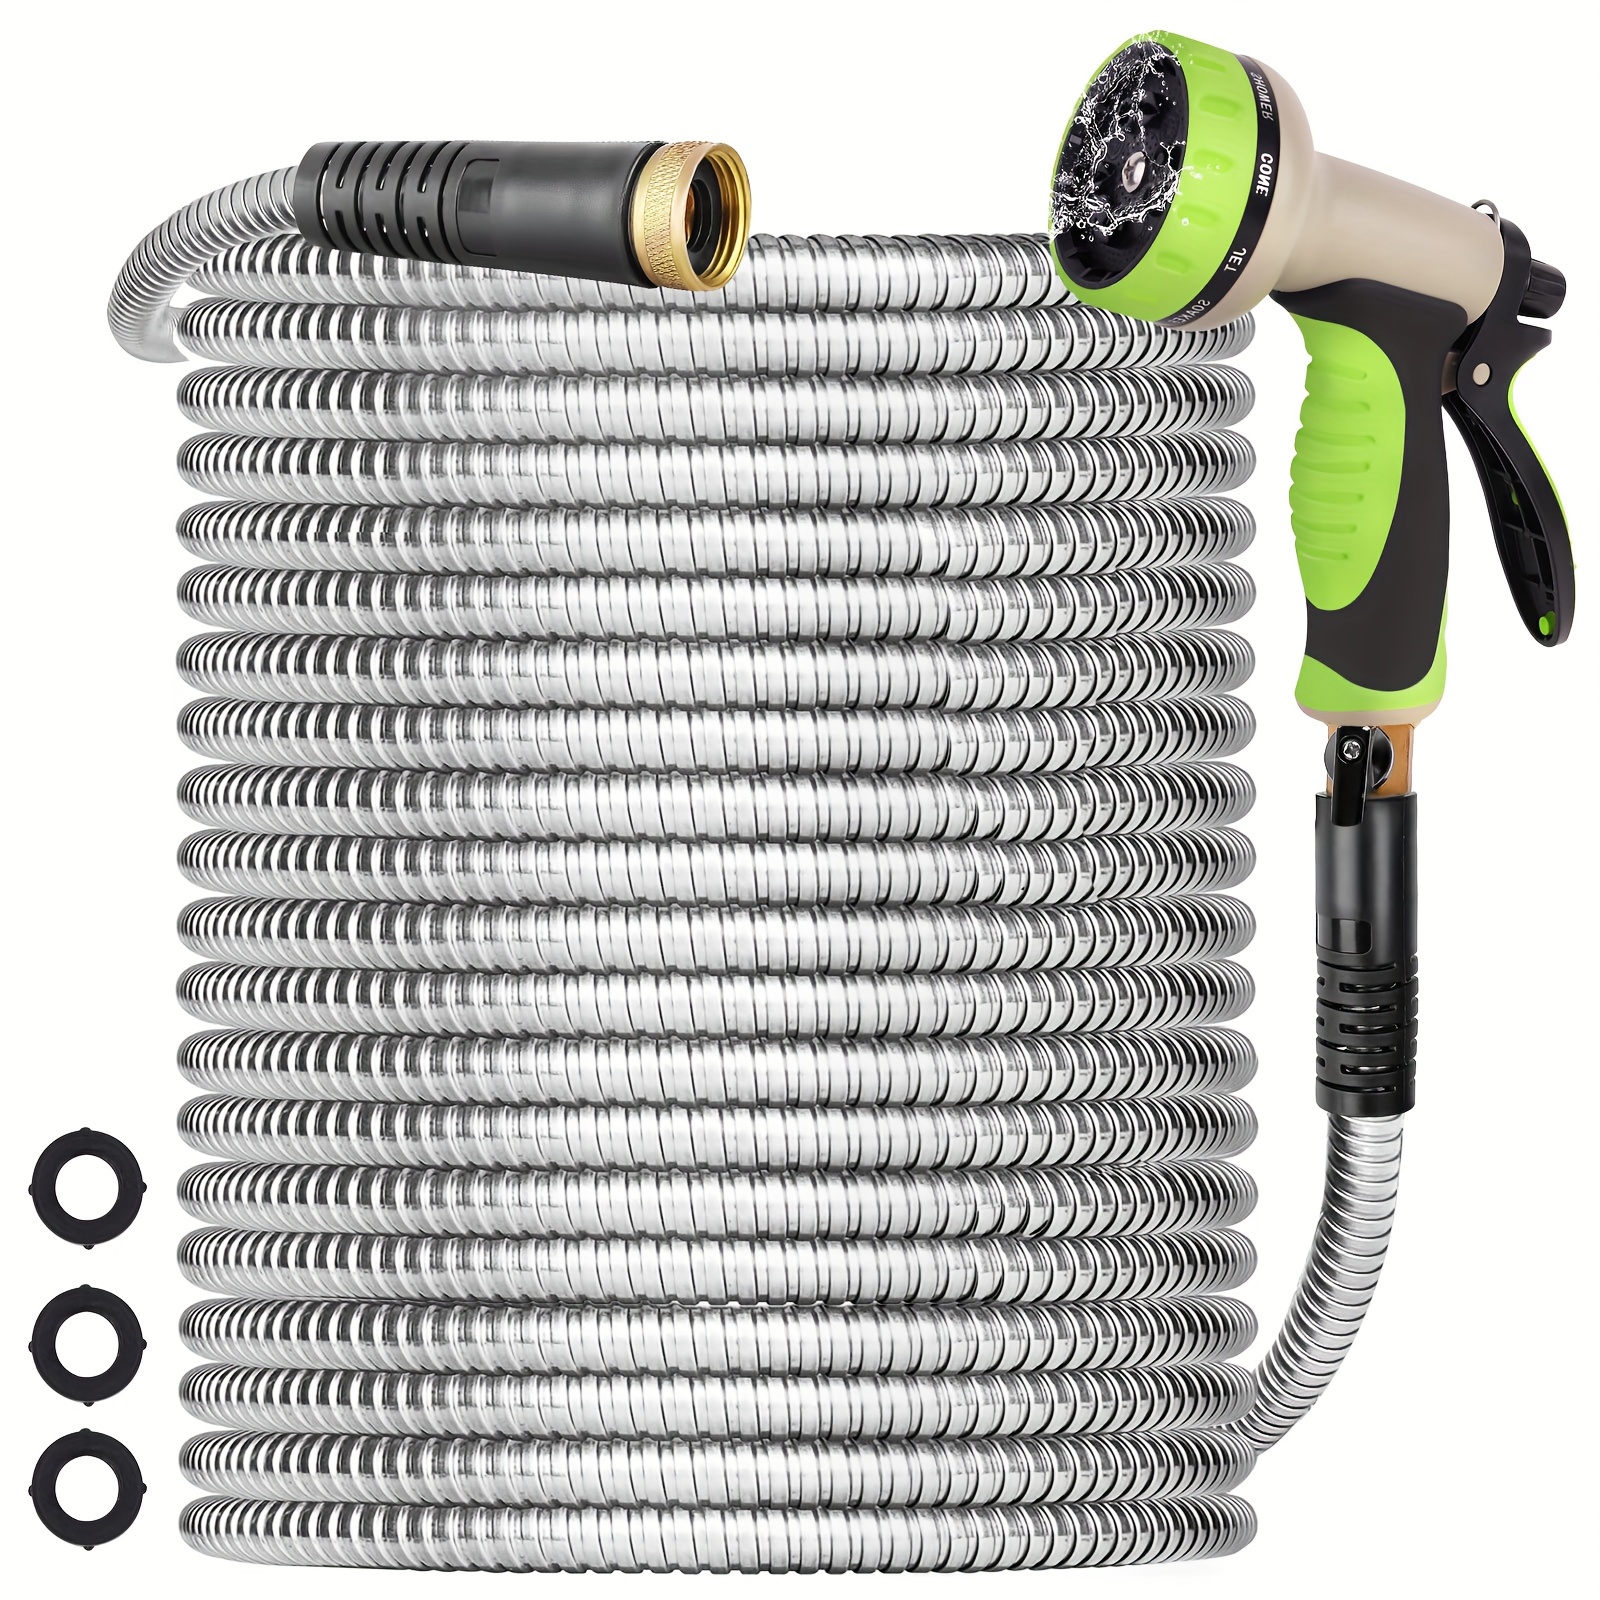 

25ft Metal Garden Hose Stainless Steel Heavy Duty Lightweight Flexible Water Hose With 3/4'' Fitting 10 Function Nozzle Leak Puncture Proof, No Kink & , Durable Outdoor Pipe Yard Lawn